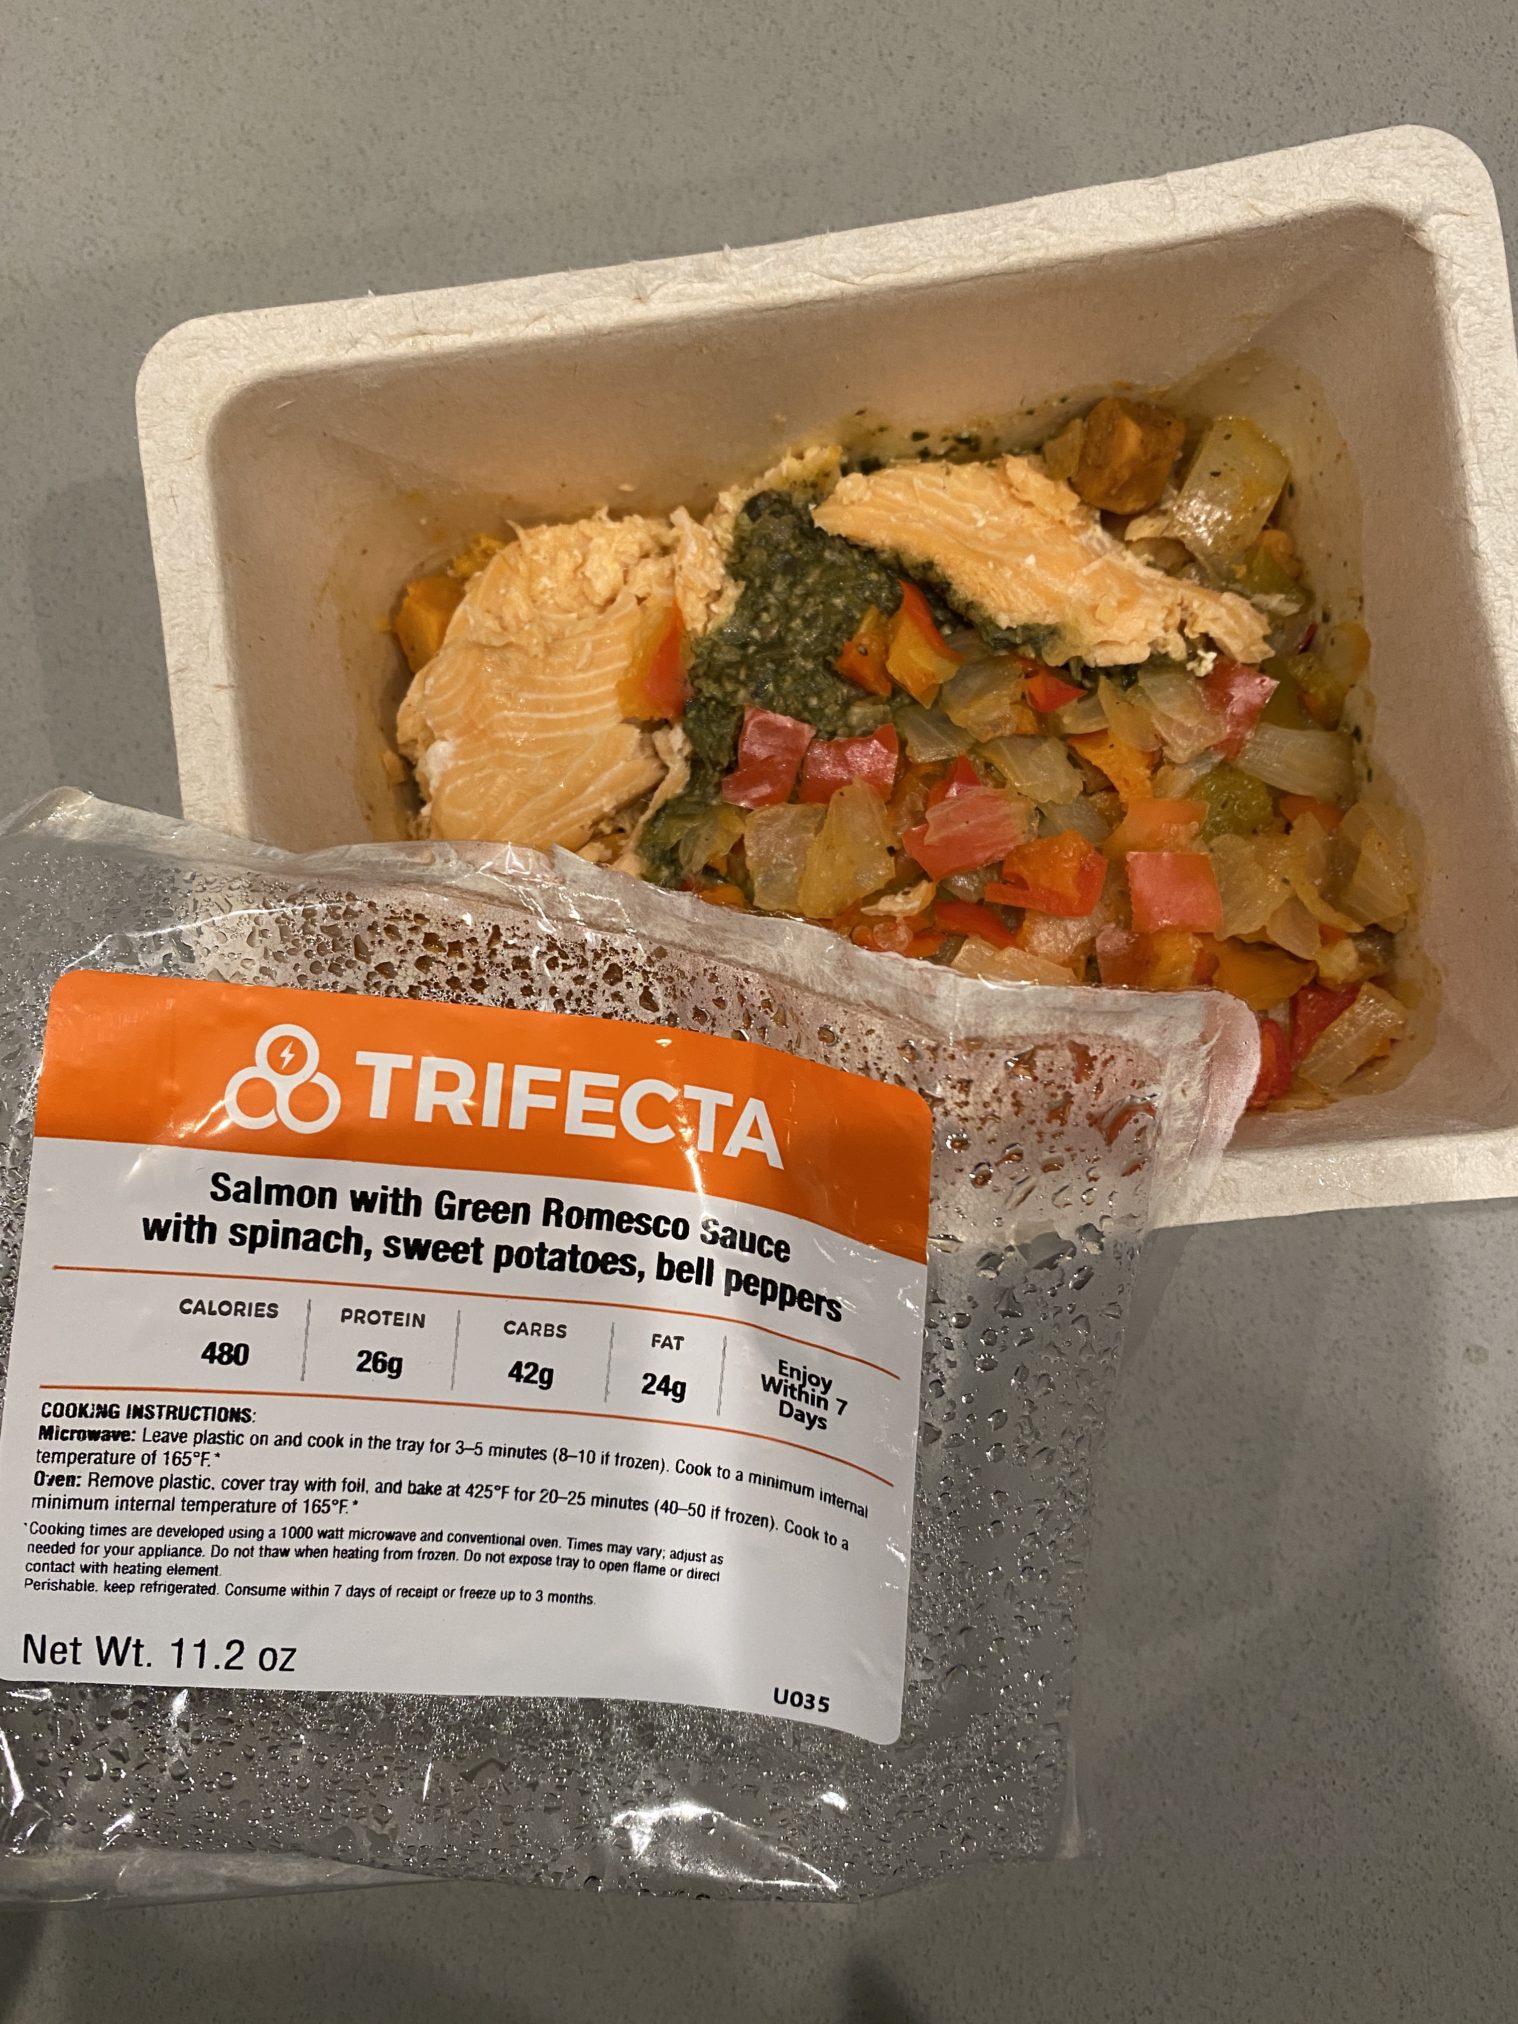 Trifecta Meal Subscription: Do The Meals Taste Good?